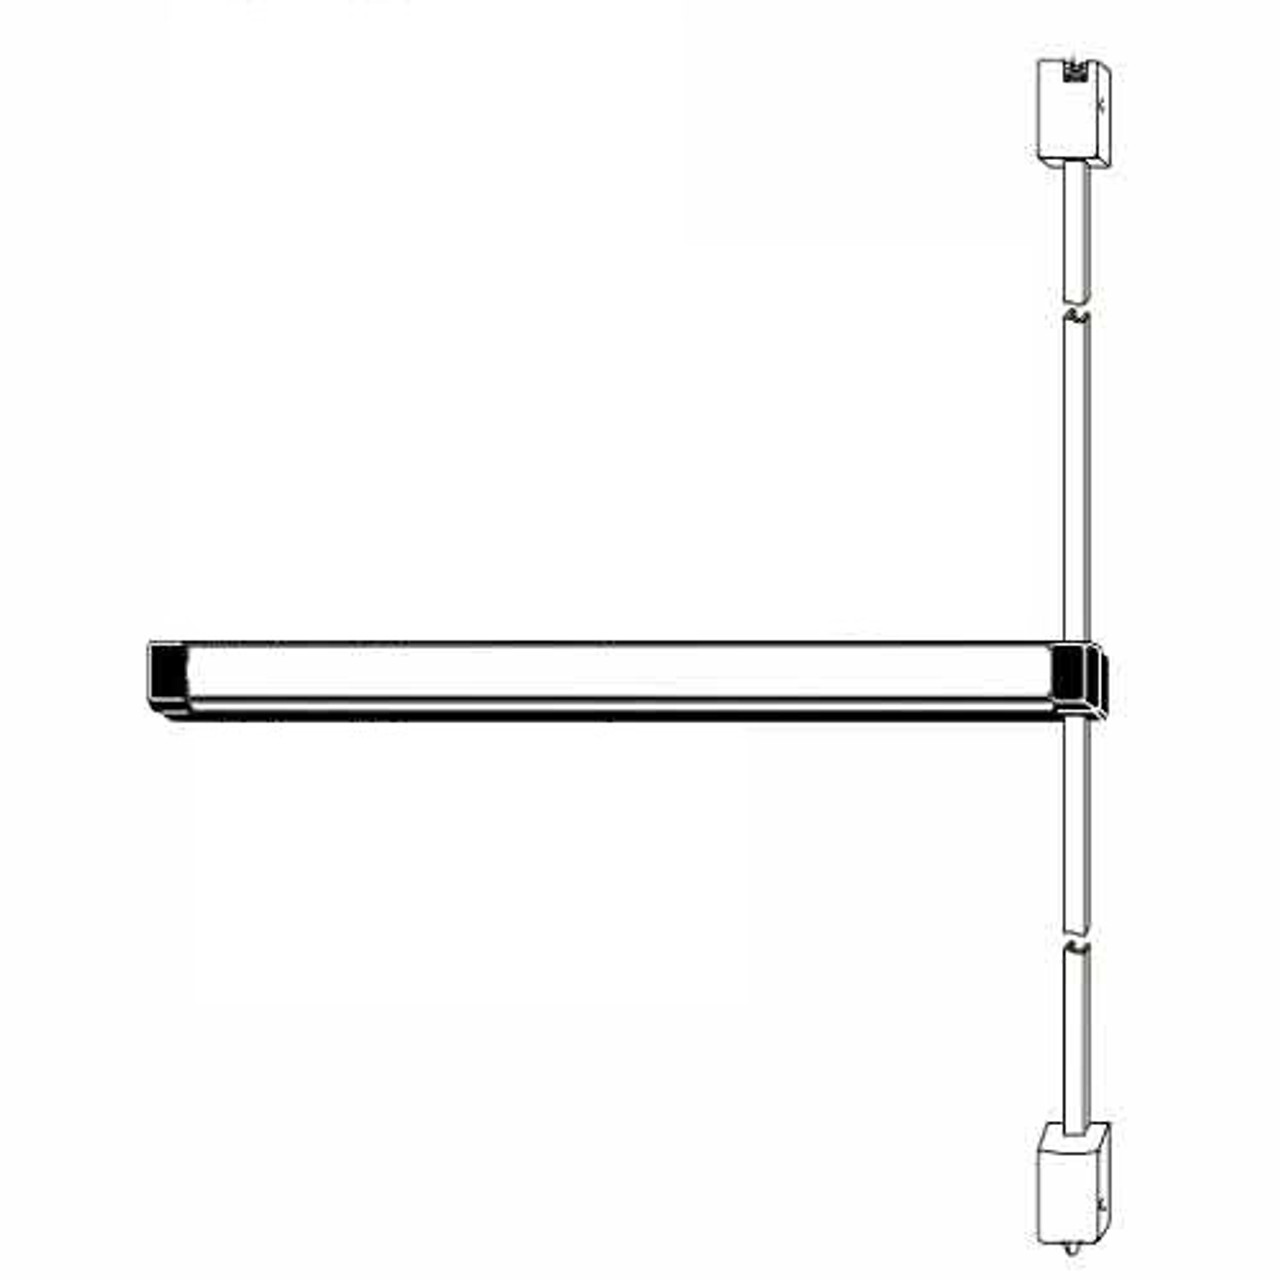 Adams Rite Fire-rated Surface Vertical Rod Exit Device